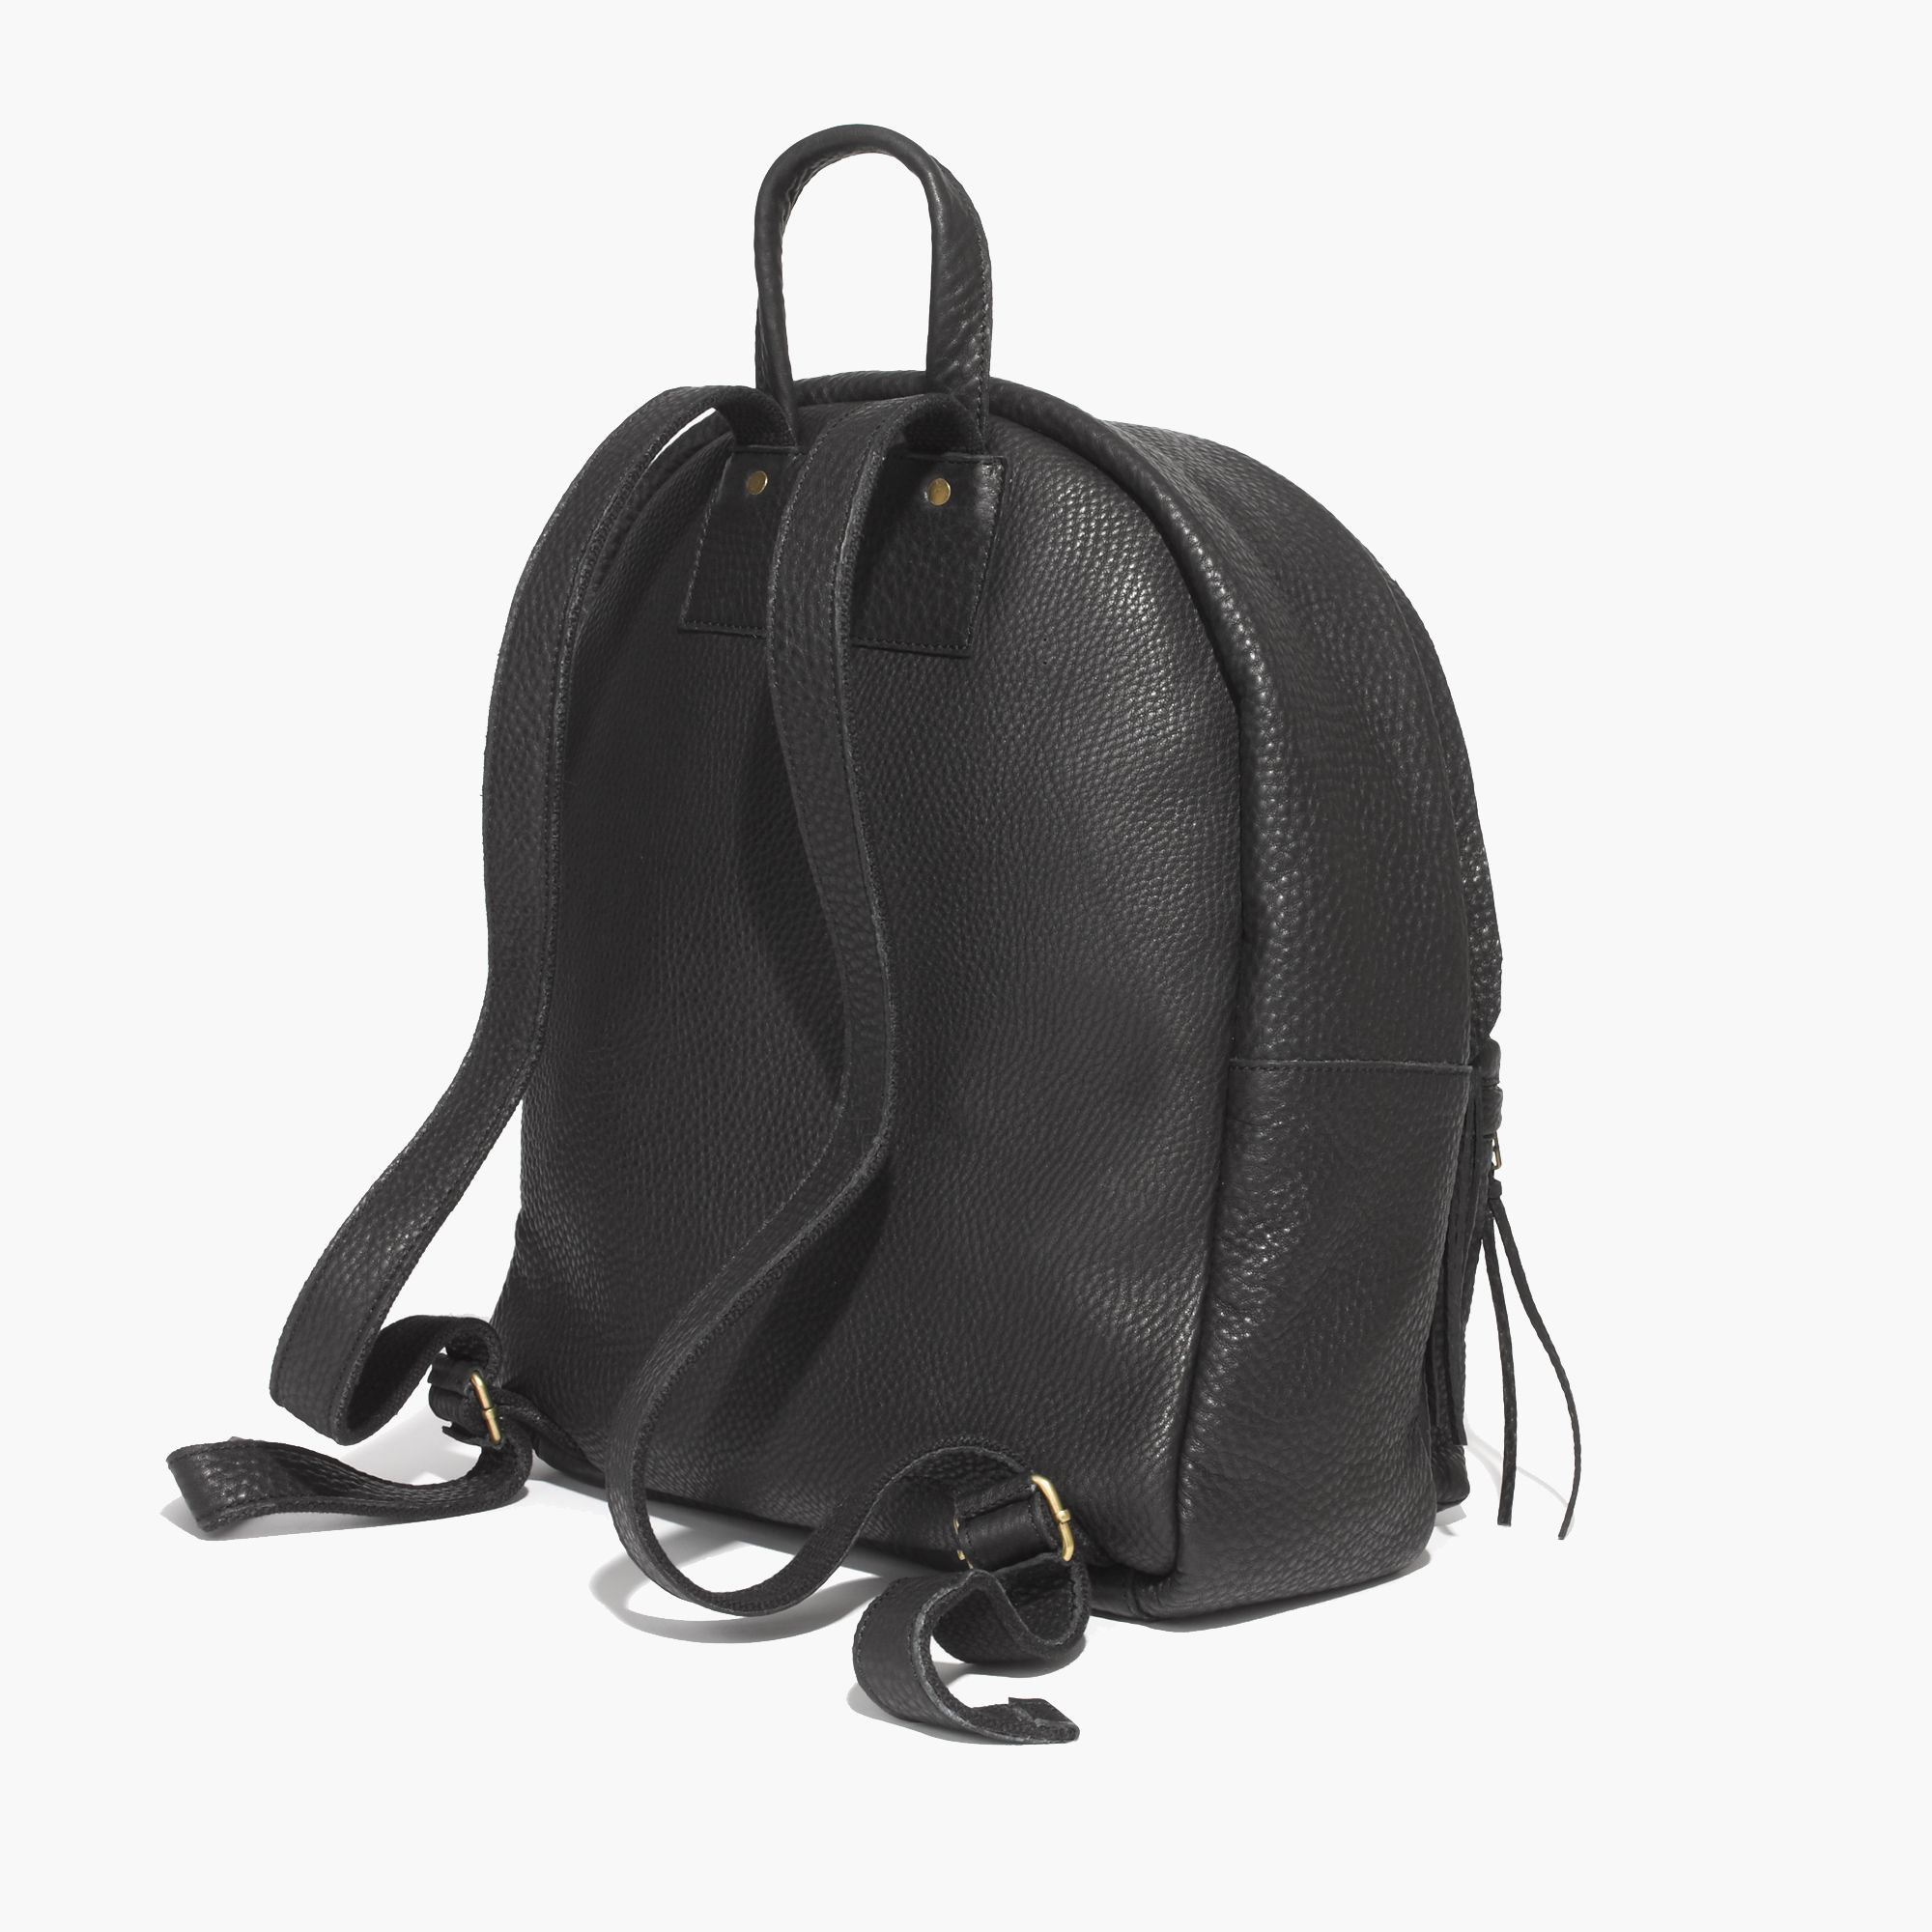 Madewell The Lorimer Leather Backpack in Black - Lyst